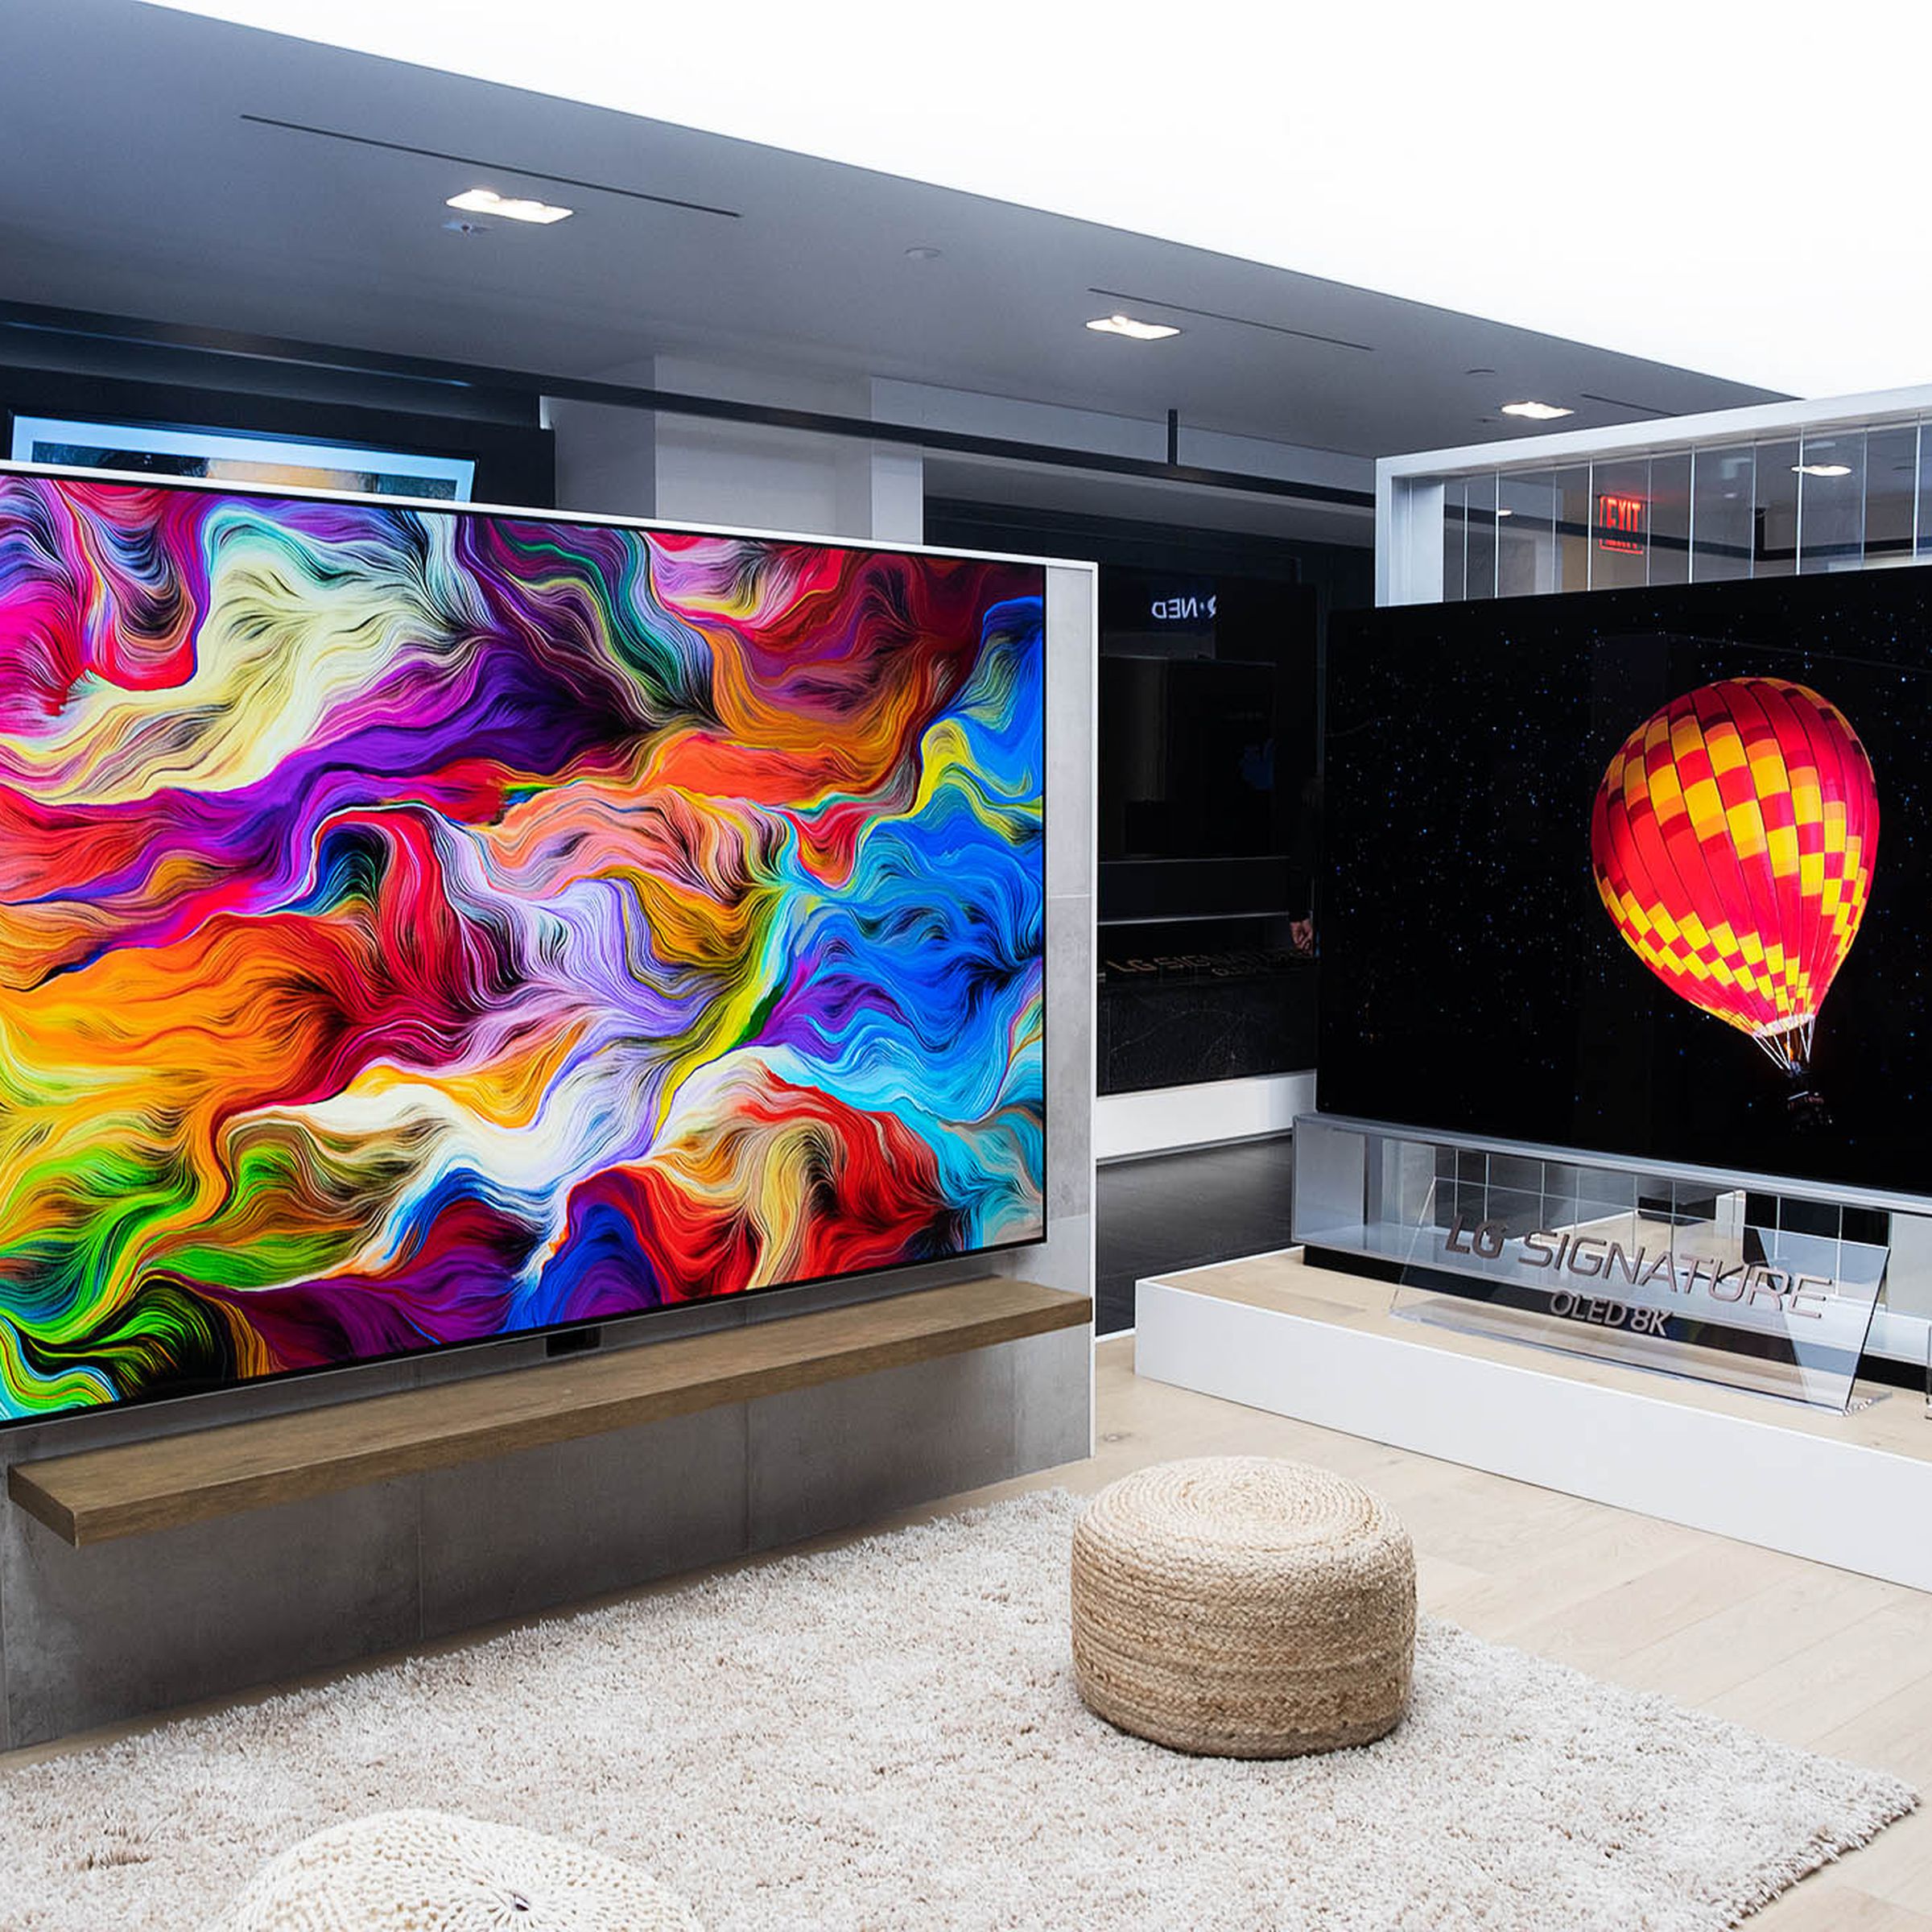 A picture of two wall-mounted LG TVs taken during CES 2022.